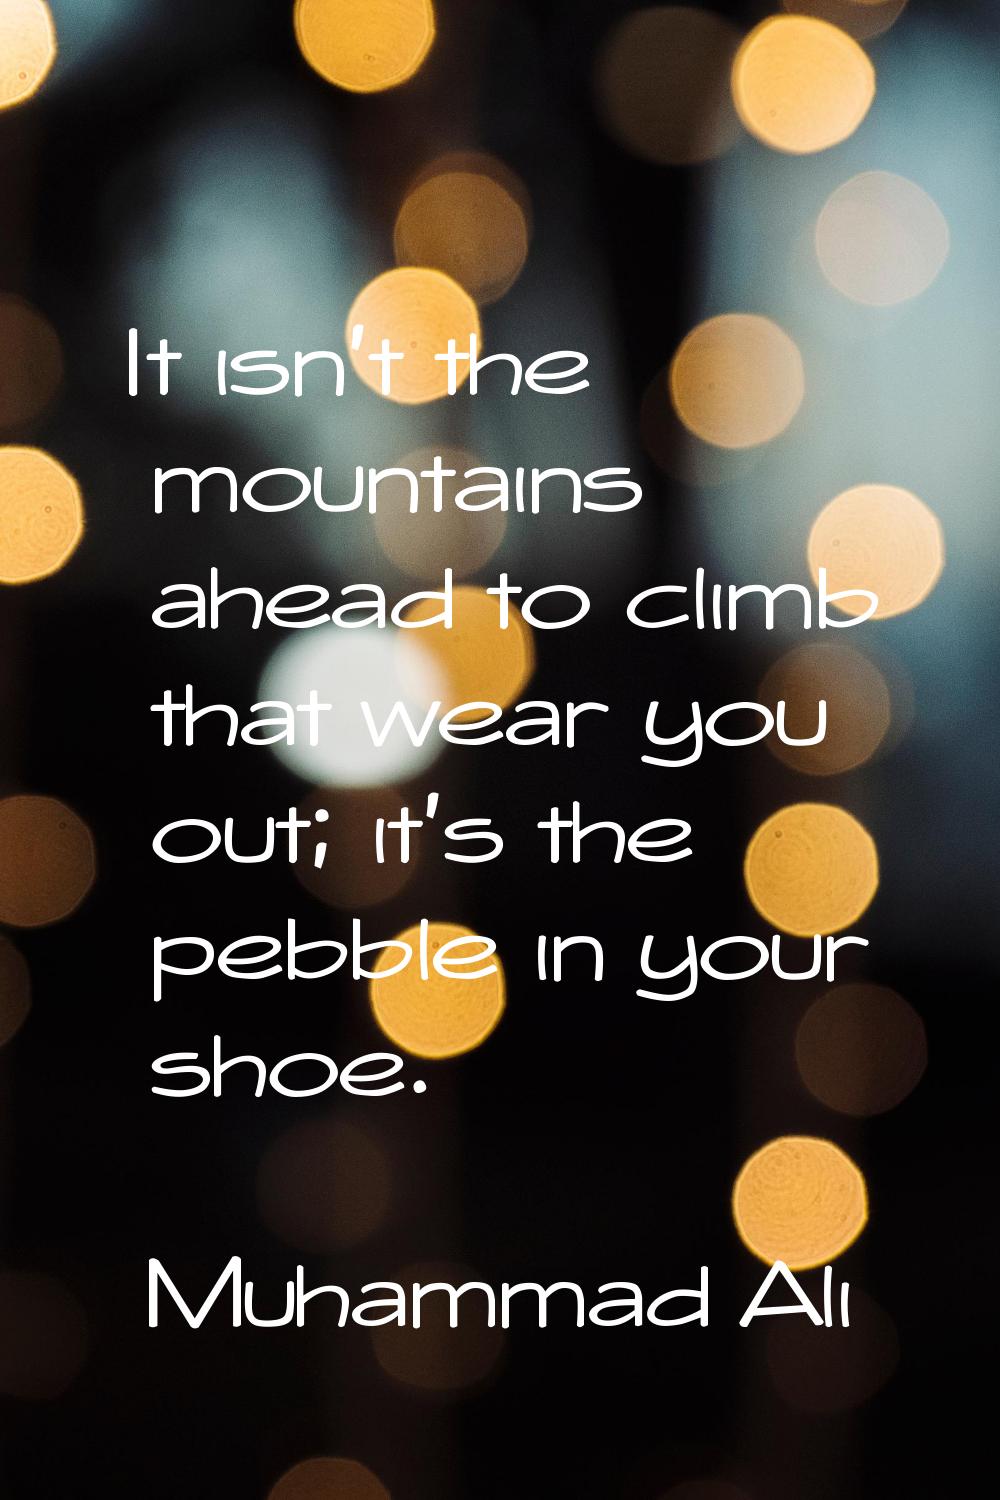 It isn't the mountains ahead to climb that wear you out; it's the pebble in your shoe.